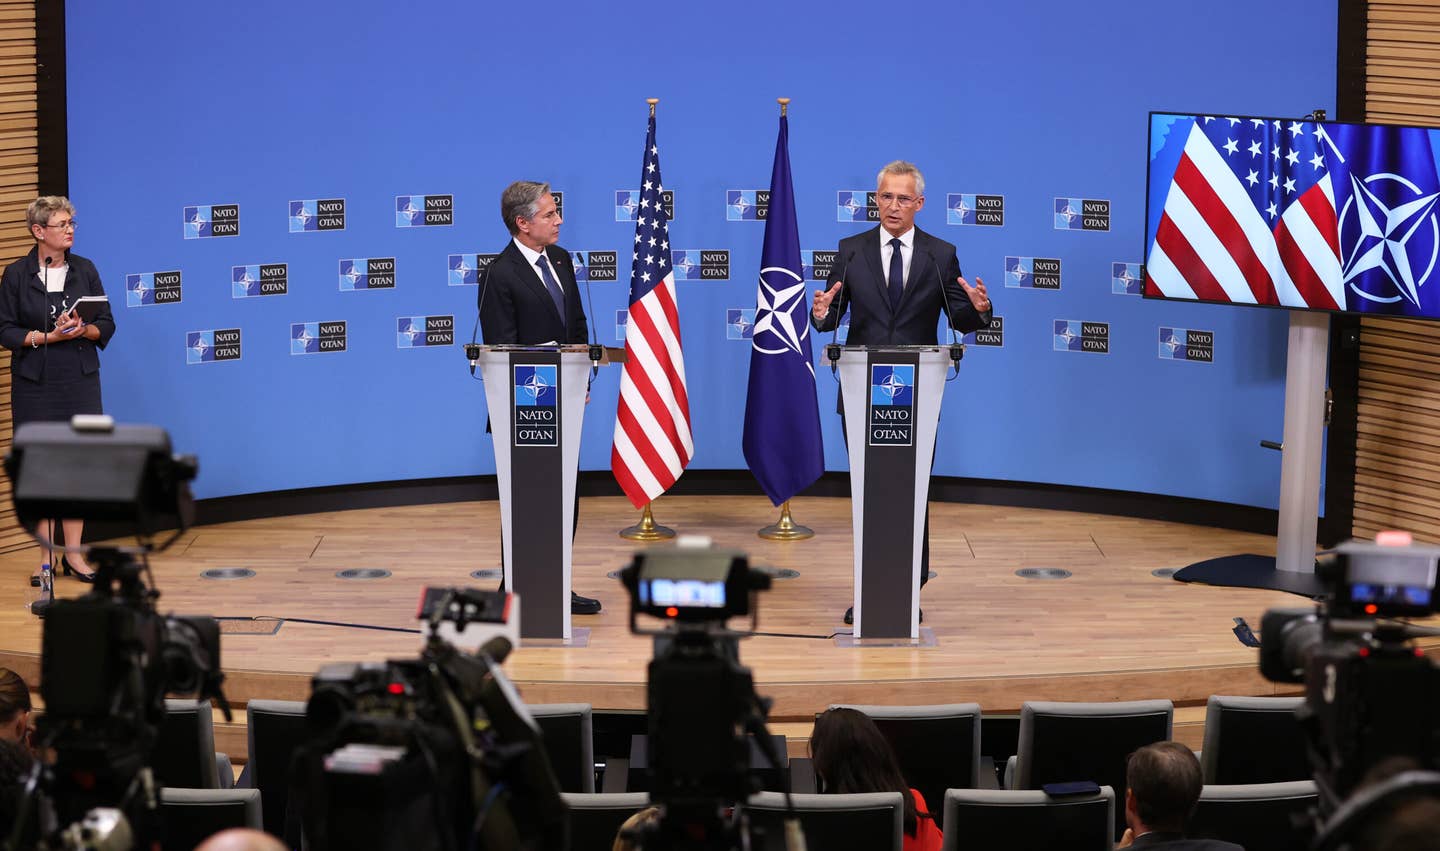 NATO Secretary General Jens Stoltenberg and US Secretary of State Antony Blinken hold a joint press conference after their meeting in Brussels, Belgium. <em>Dursun Aydemir/Anadolu Agency via Getty Images</em>